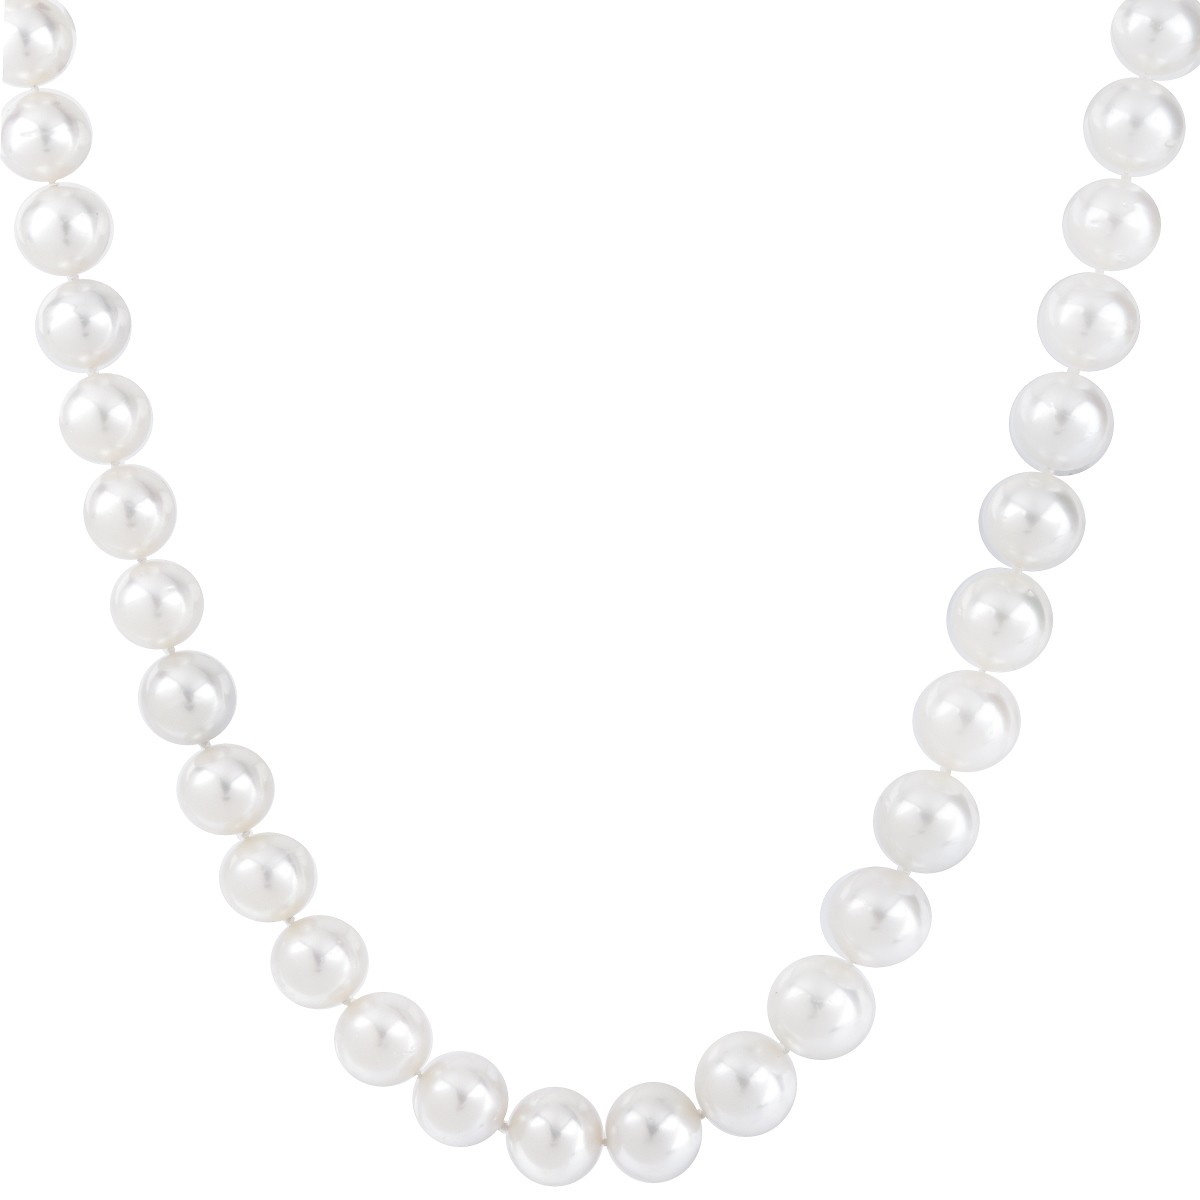 14-16mm South Sea Pearl Necklace